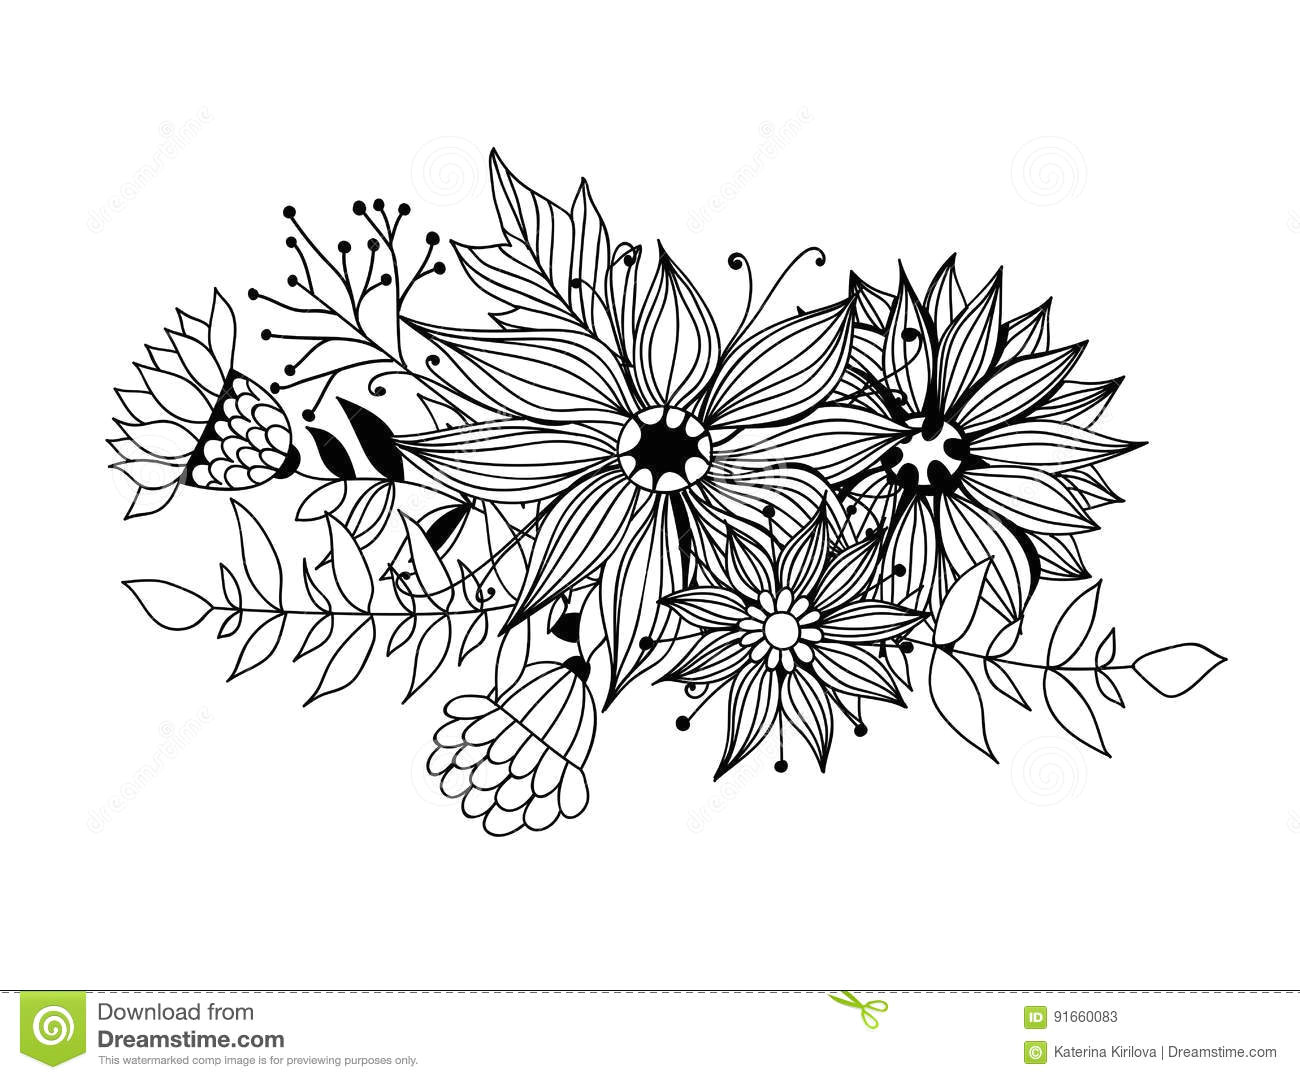 doodle bouquet od flowers and leaves on white background template design for invitations cards and more more similar stock illustrations